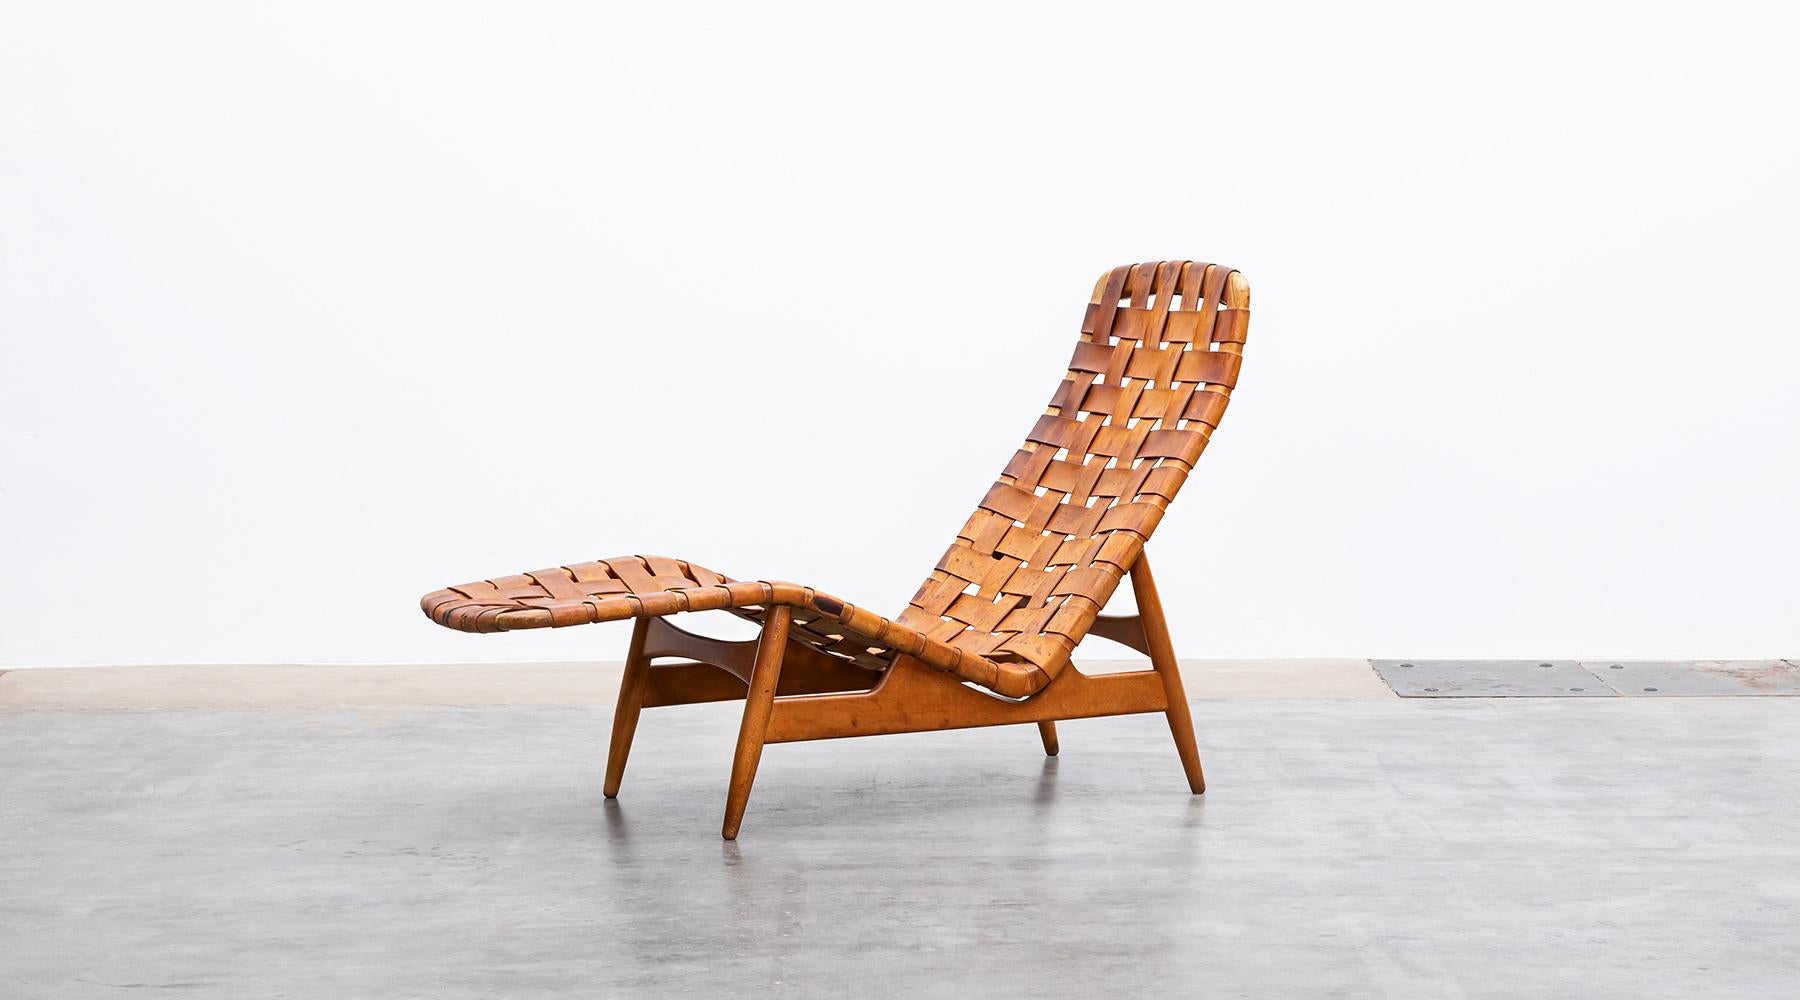 Chaise Longue, beech, leather, Arne Vodder for Bovirke, Denmark, 1952.

The unique character of the Daybed by Arne Vodder is given through the greatly patinated braided leather straps. The frame in its flowing form is made of beech wood.